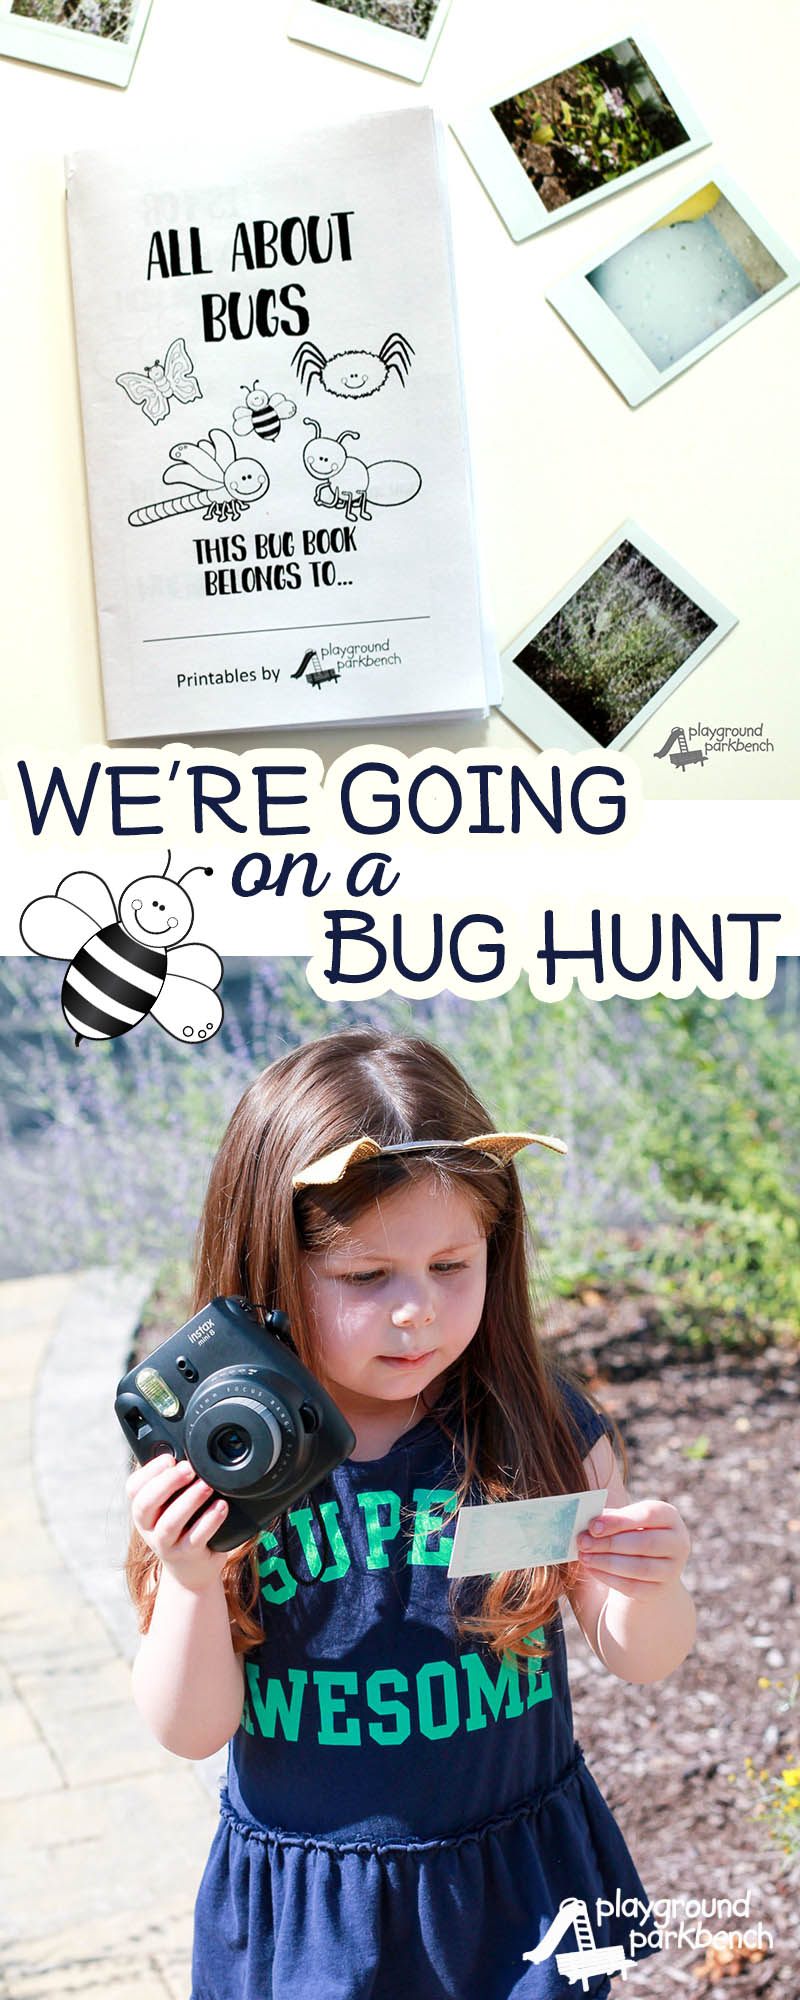 Preschoolers learn most when left to hands on, independent exploration. So what better way to learn about bugs that by observing them right in your own yard? Using photographs to document your scientific explorations, you can then use those photographs to extend your learning in the classroom. Get the printable All About Bugs book to journal and analyze the bugs you discover! #FujiFilmWonderPhotoShop #ad | Preschool | Totschool | Science | STEM | STEAM | Bugs | Insects | Learning Activities | Kids Activities